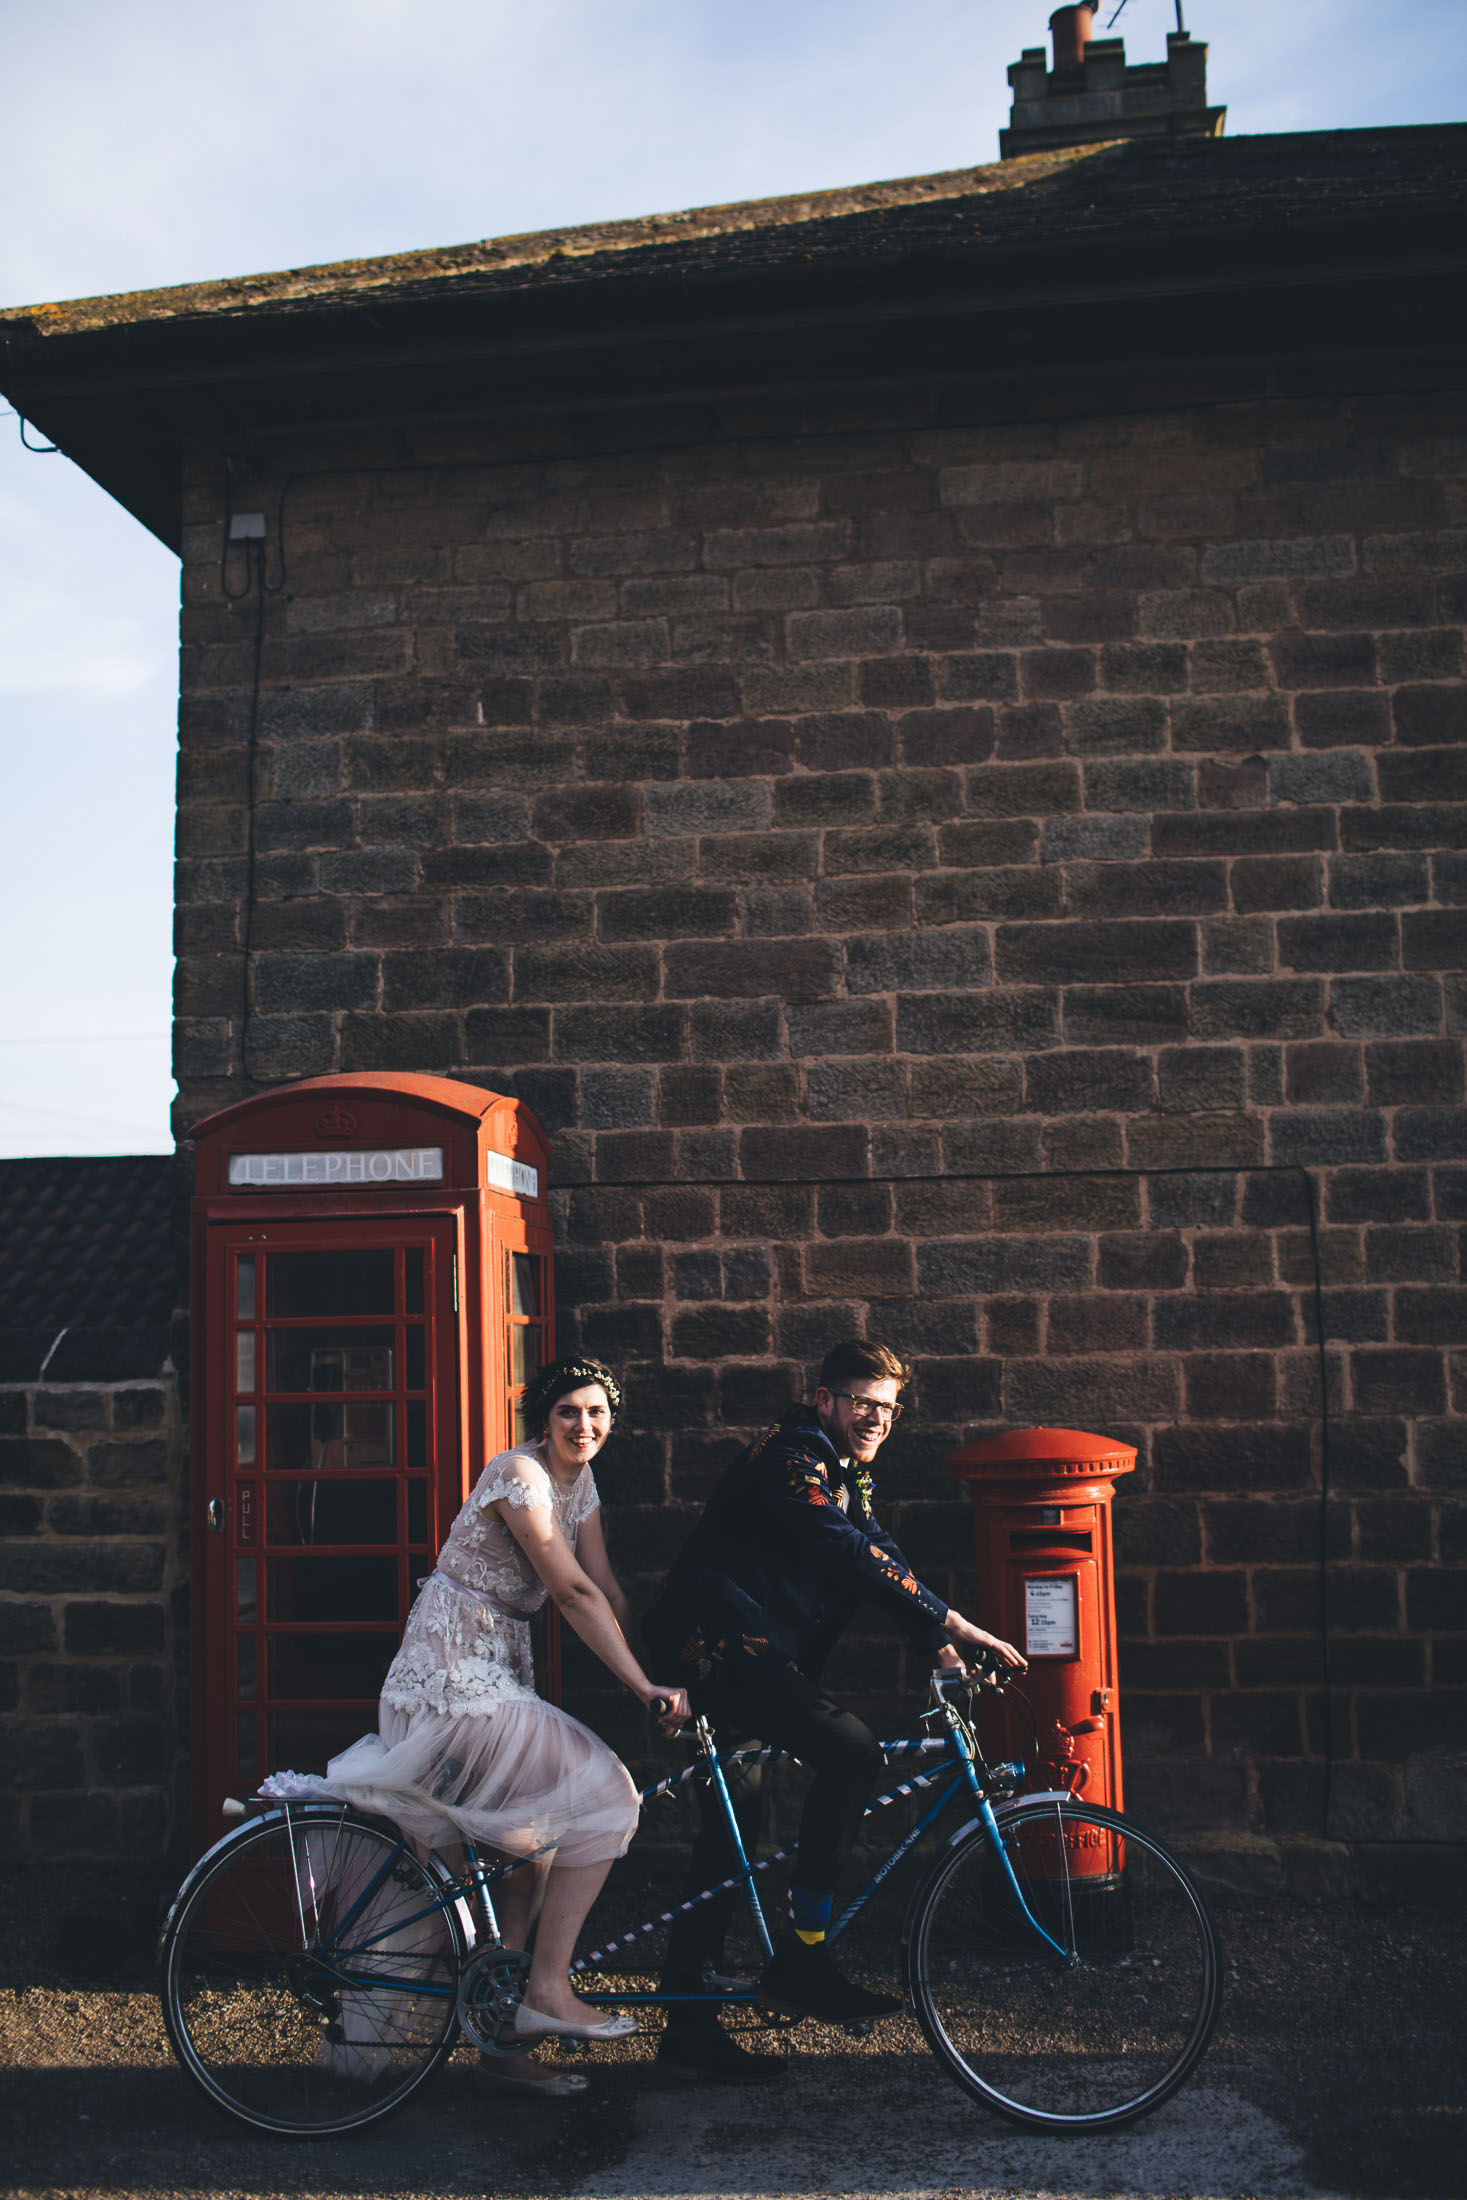 couple pose next to red post box and telephone box on their tandom bike